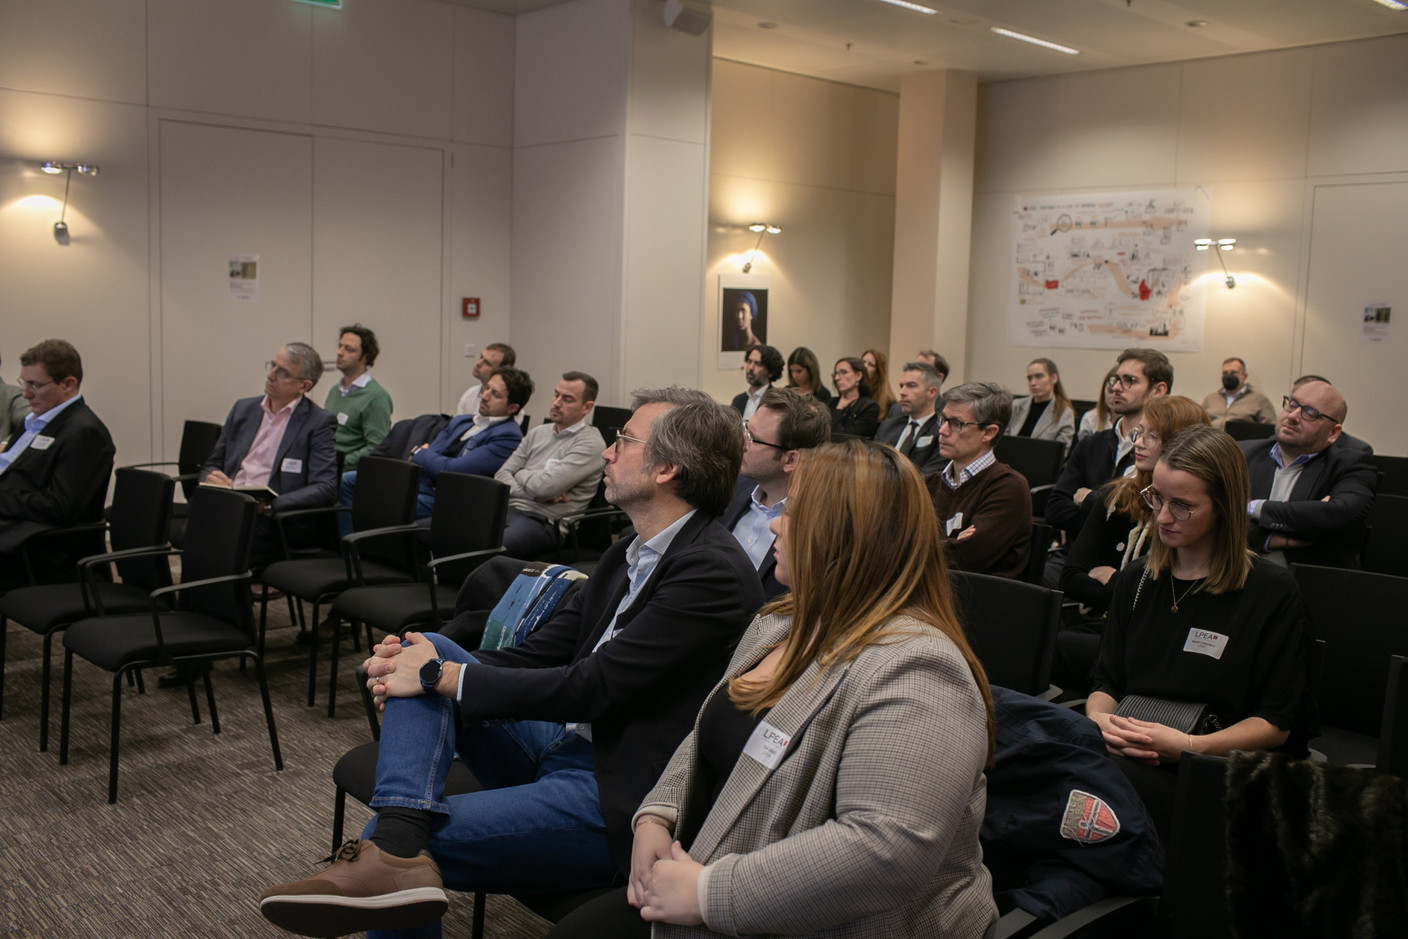 Attendees at the event on valuation during times of market uncertainty. Matic Zorman / Maison Moderne